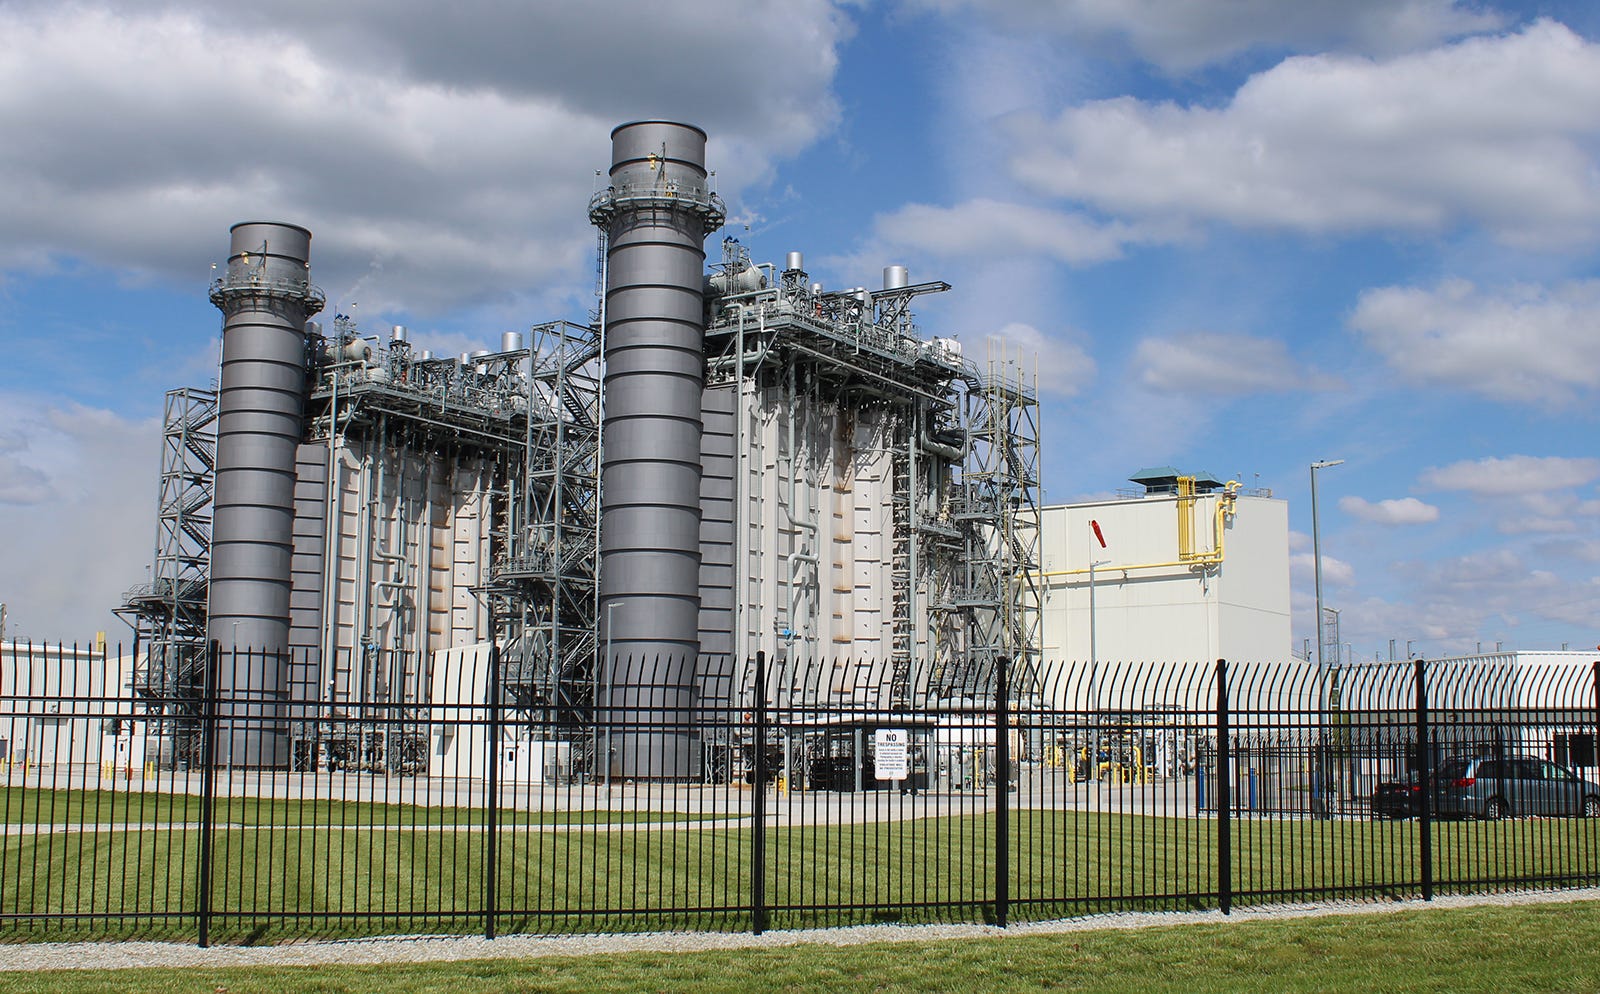 AES Indiana’s Eagle Valley Generating Station plant sits on Blue Bluff Road north of Martinsville. The plant was offline for nearly a year after two incidents caused problems.